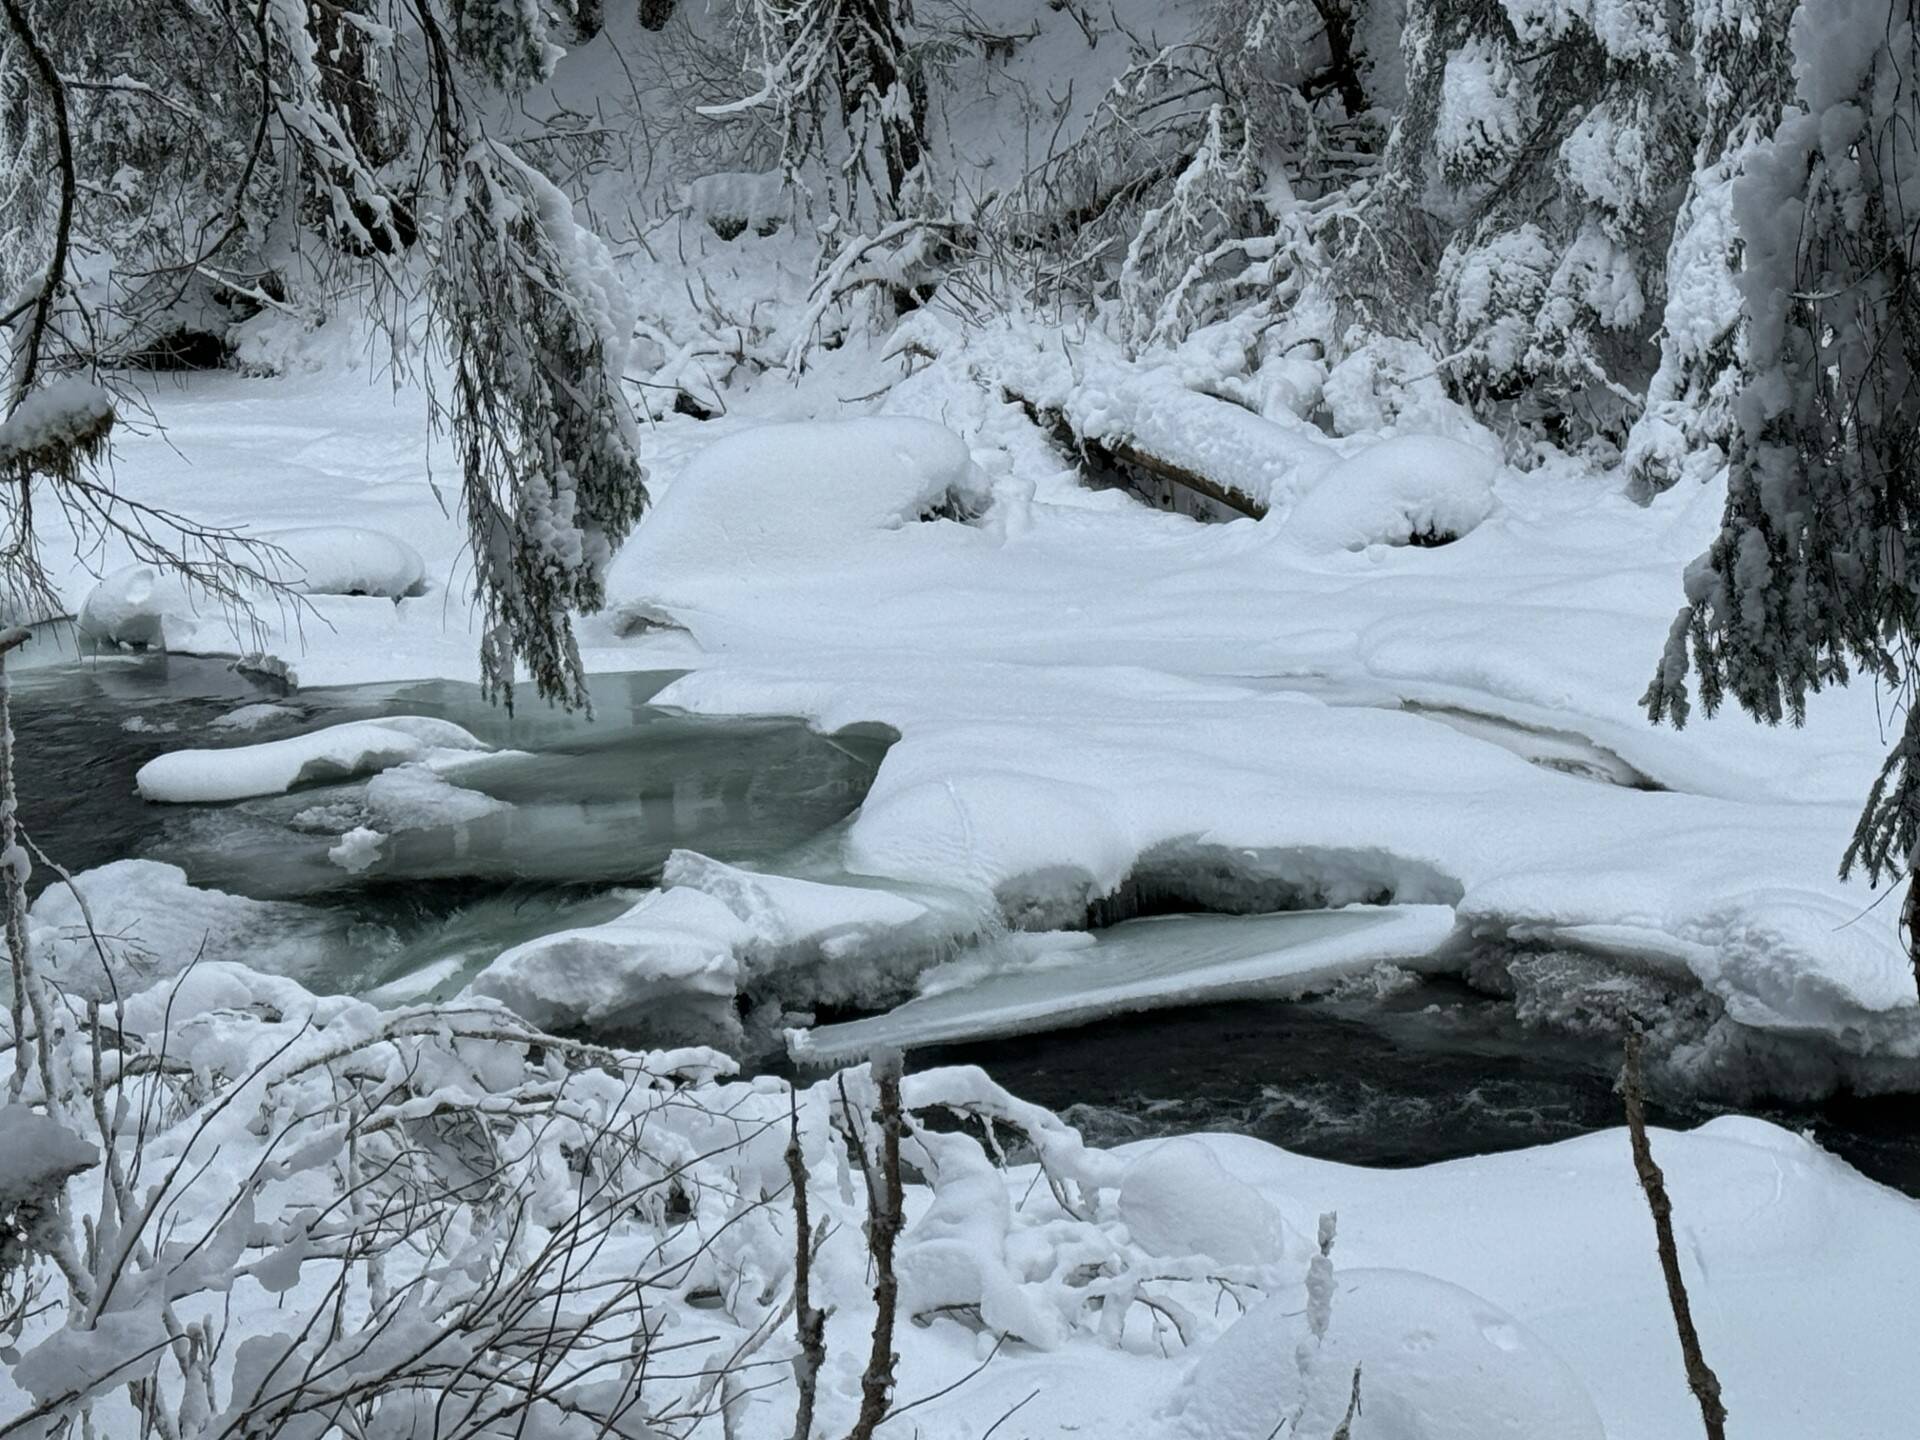 Ice, snow and water mingle along the Montana Creek Trail on Jan. 21. (Photo by Deana Barajas)